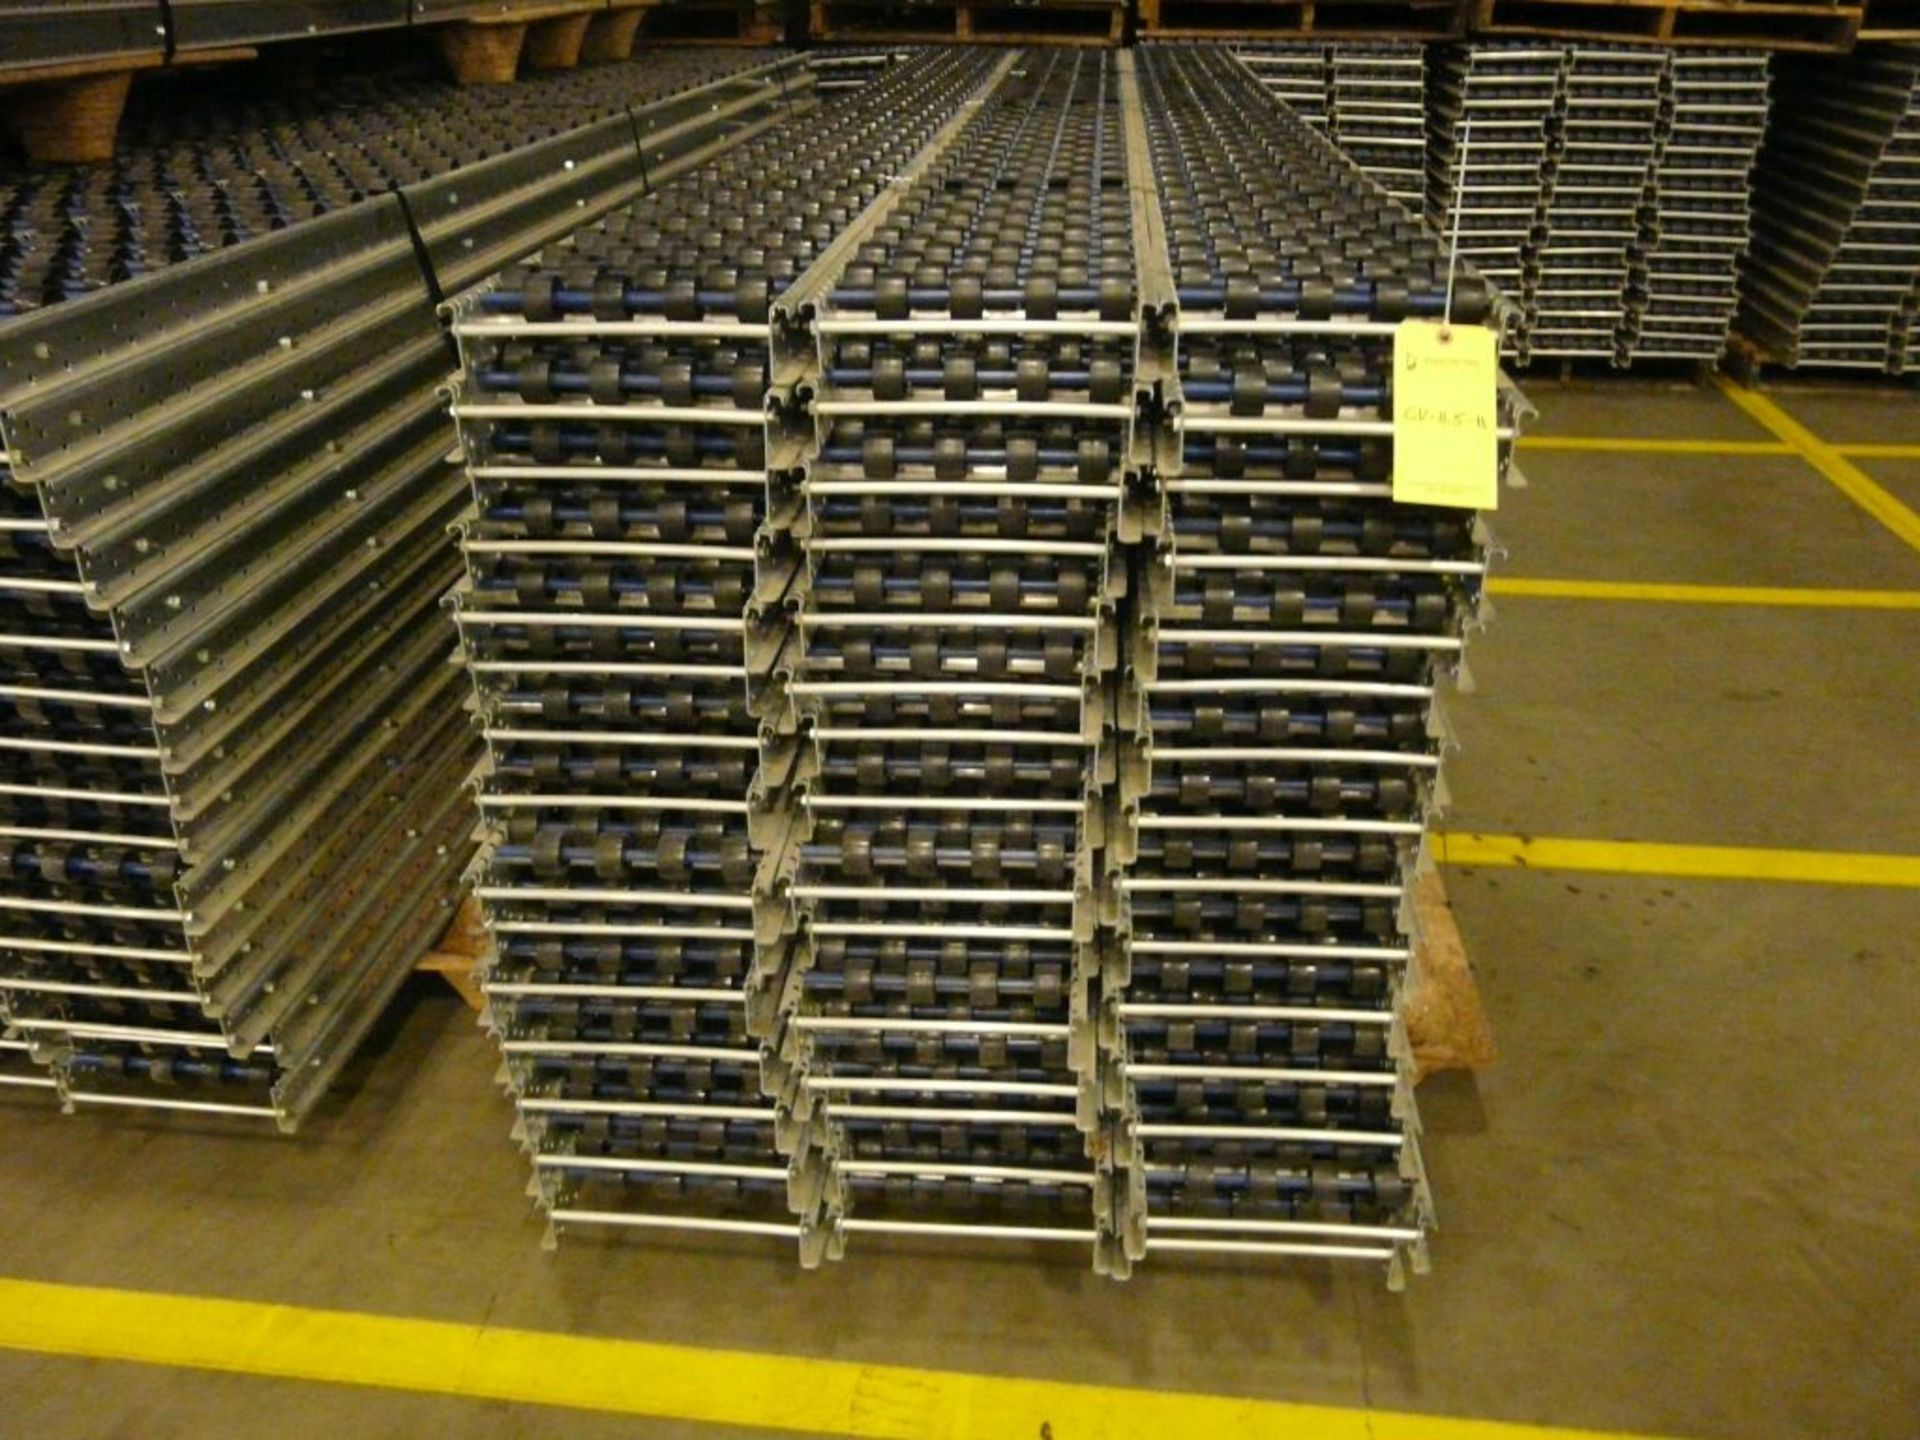 Lot of (90) SpanTrack Wheelbed Carton Flow Conveyors - 11.5'L x 11"W; Tag: 223653 - $30 Lot - Image 2 of 4